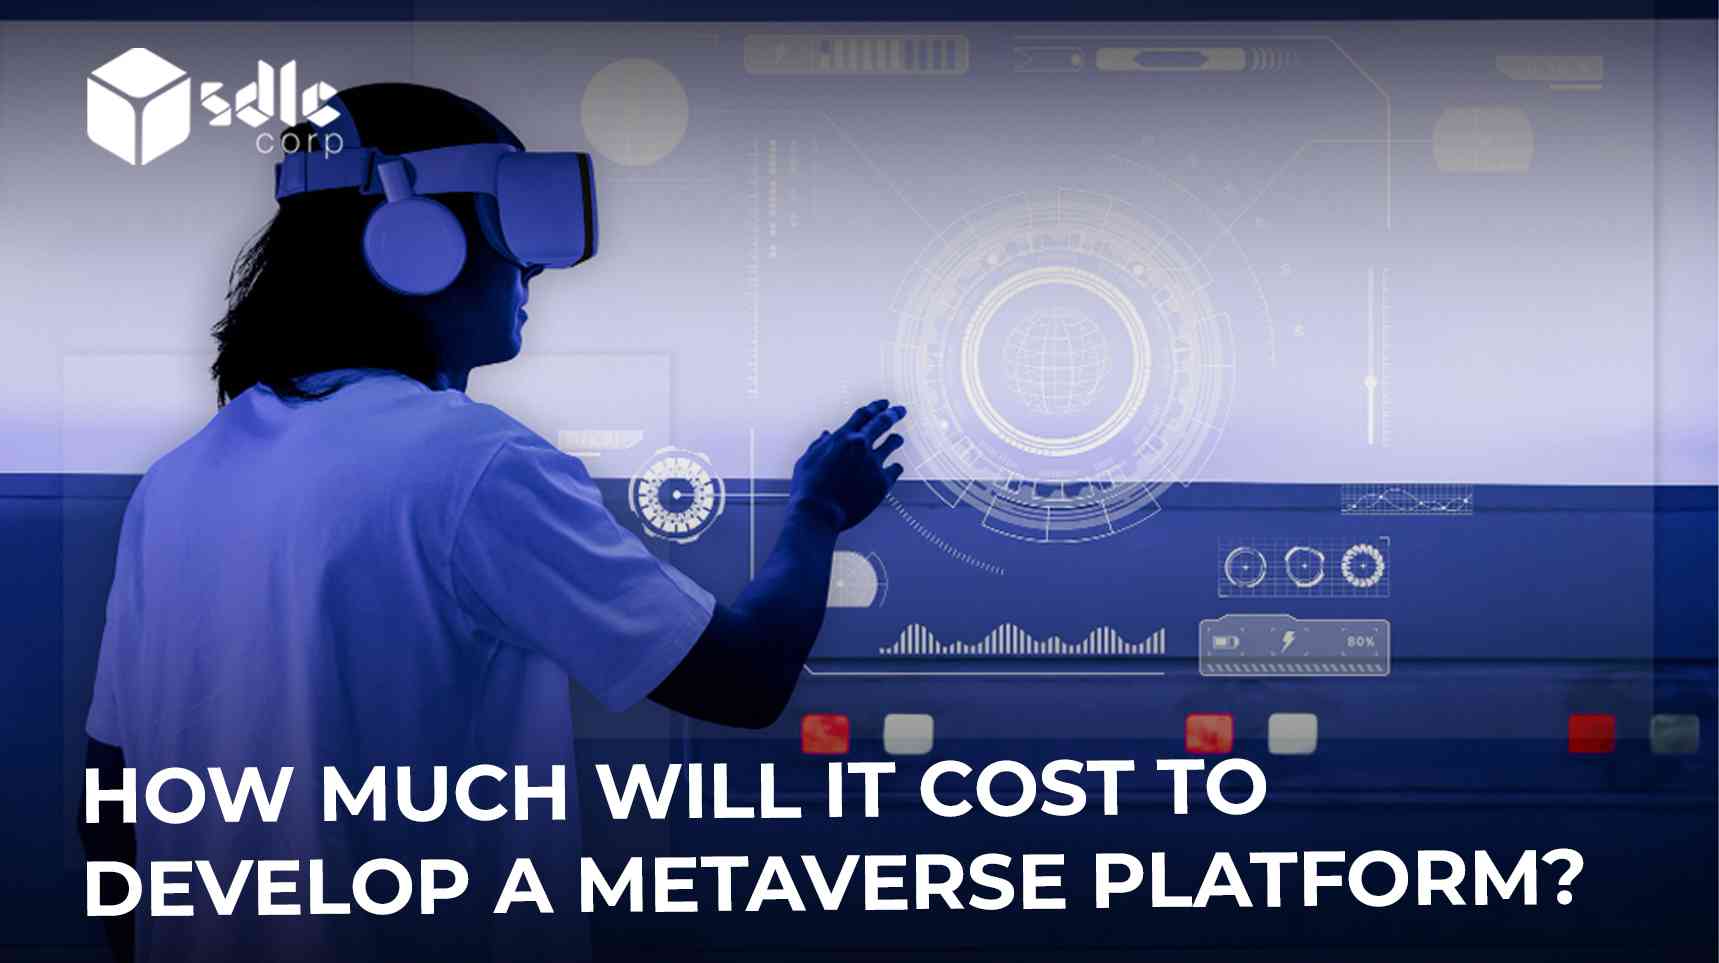 How much will it cost to develop a metaverse platform?